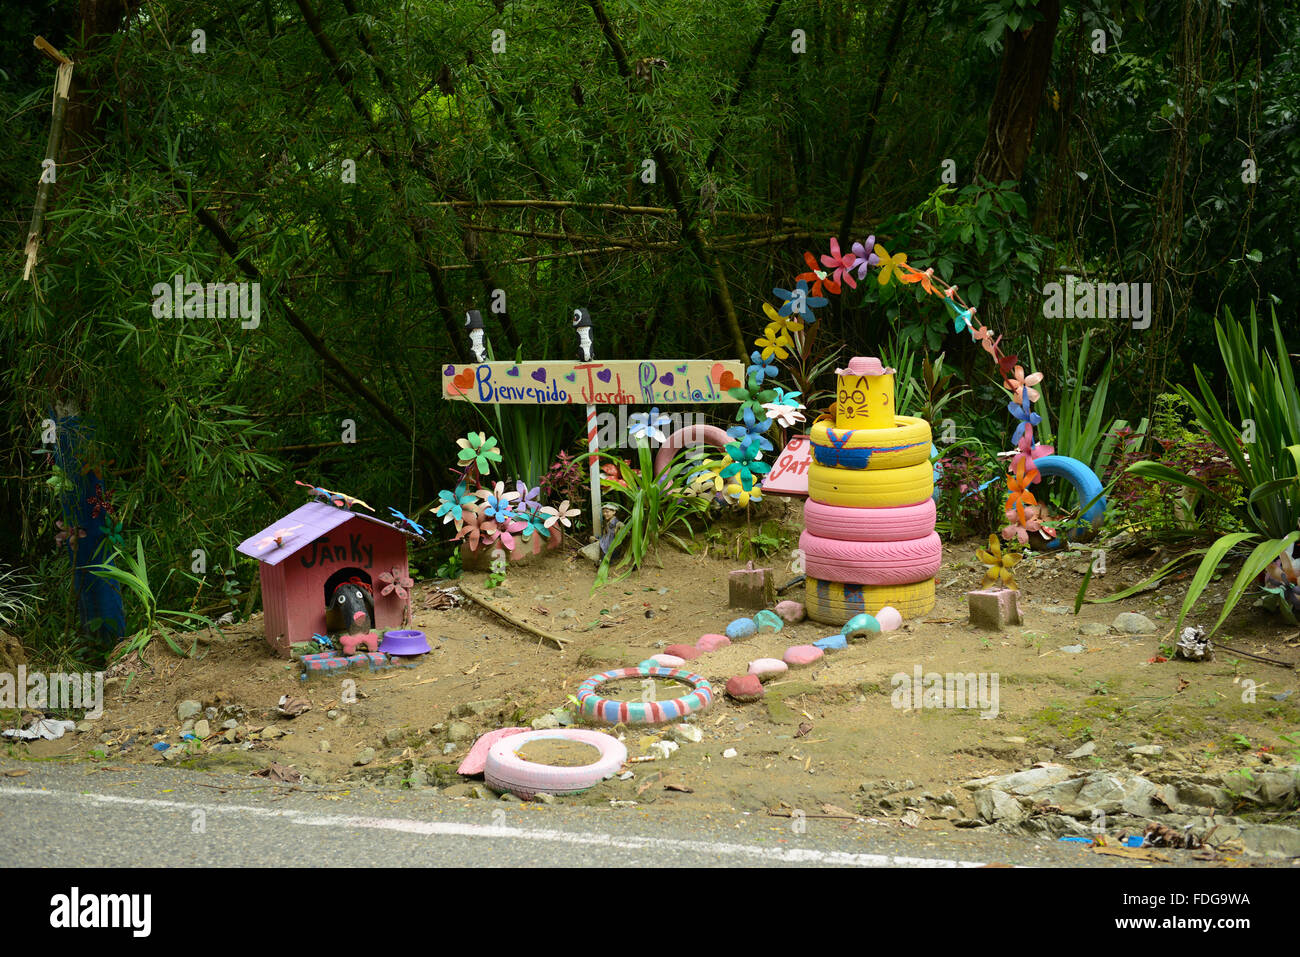 Garden decorations made out of recycled objects. PUERTO RICO - Utuado. Caribbean Island. US territory. Stock Photo